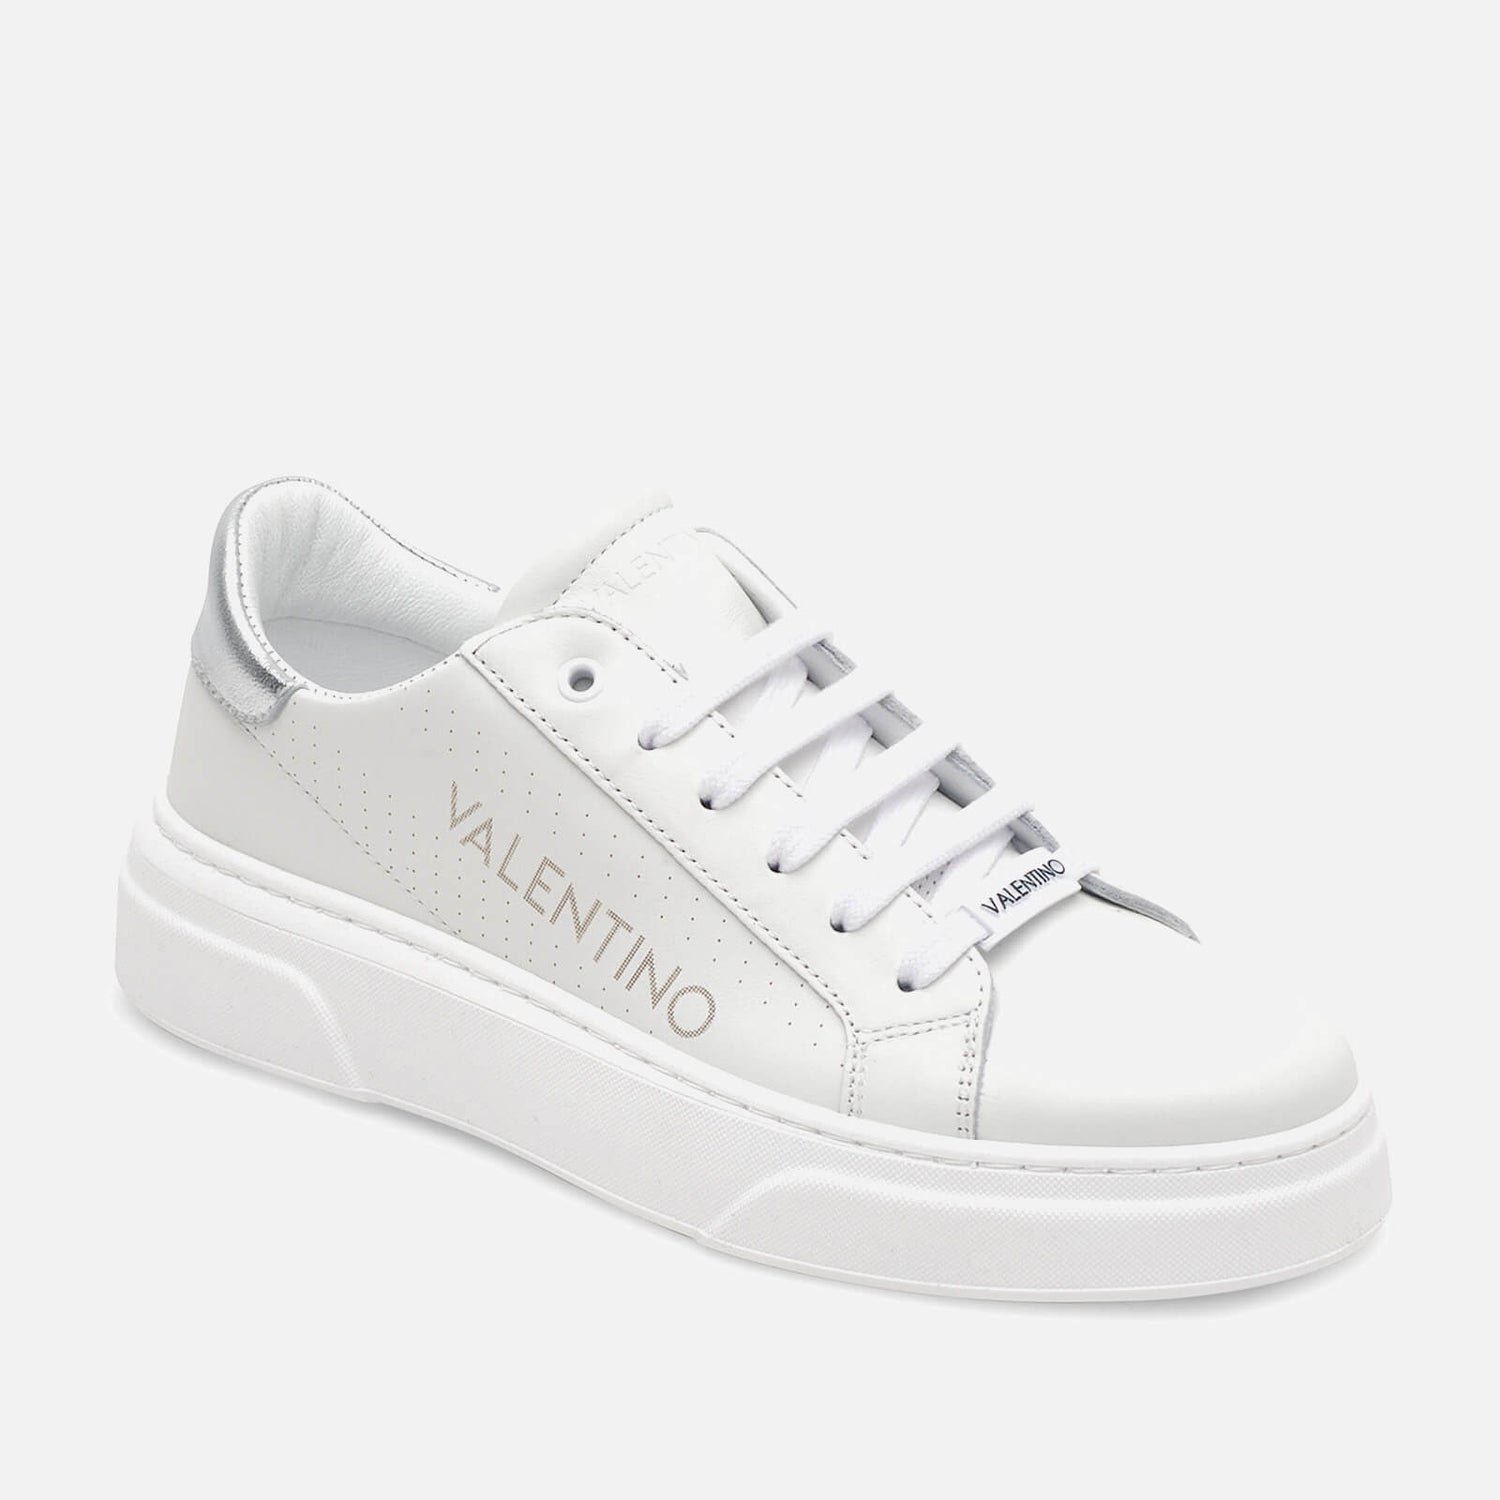 Valentino Women's Leather Cupsole Trainers - White/Silver